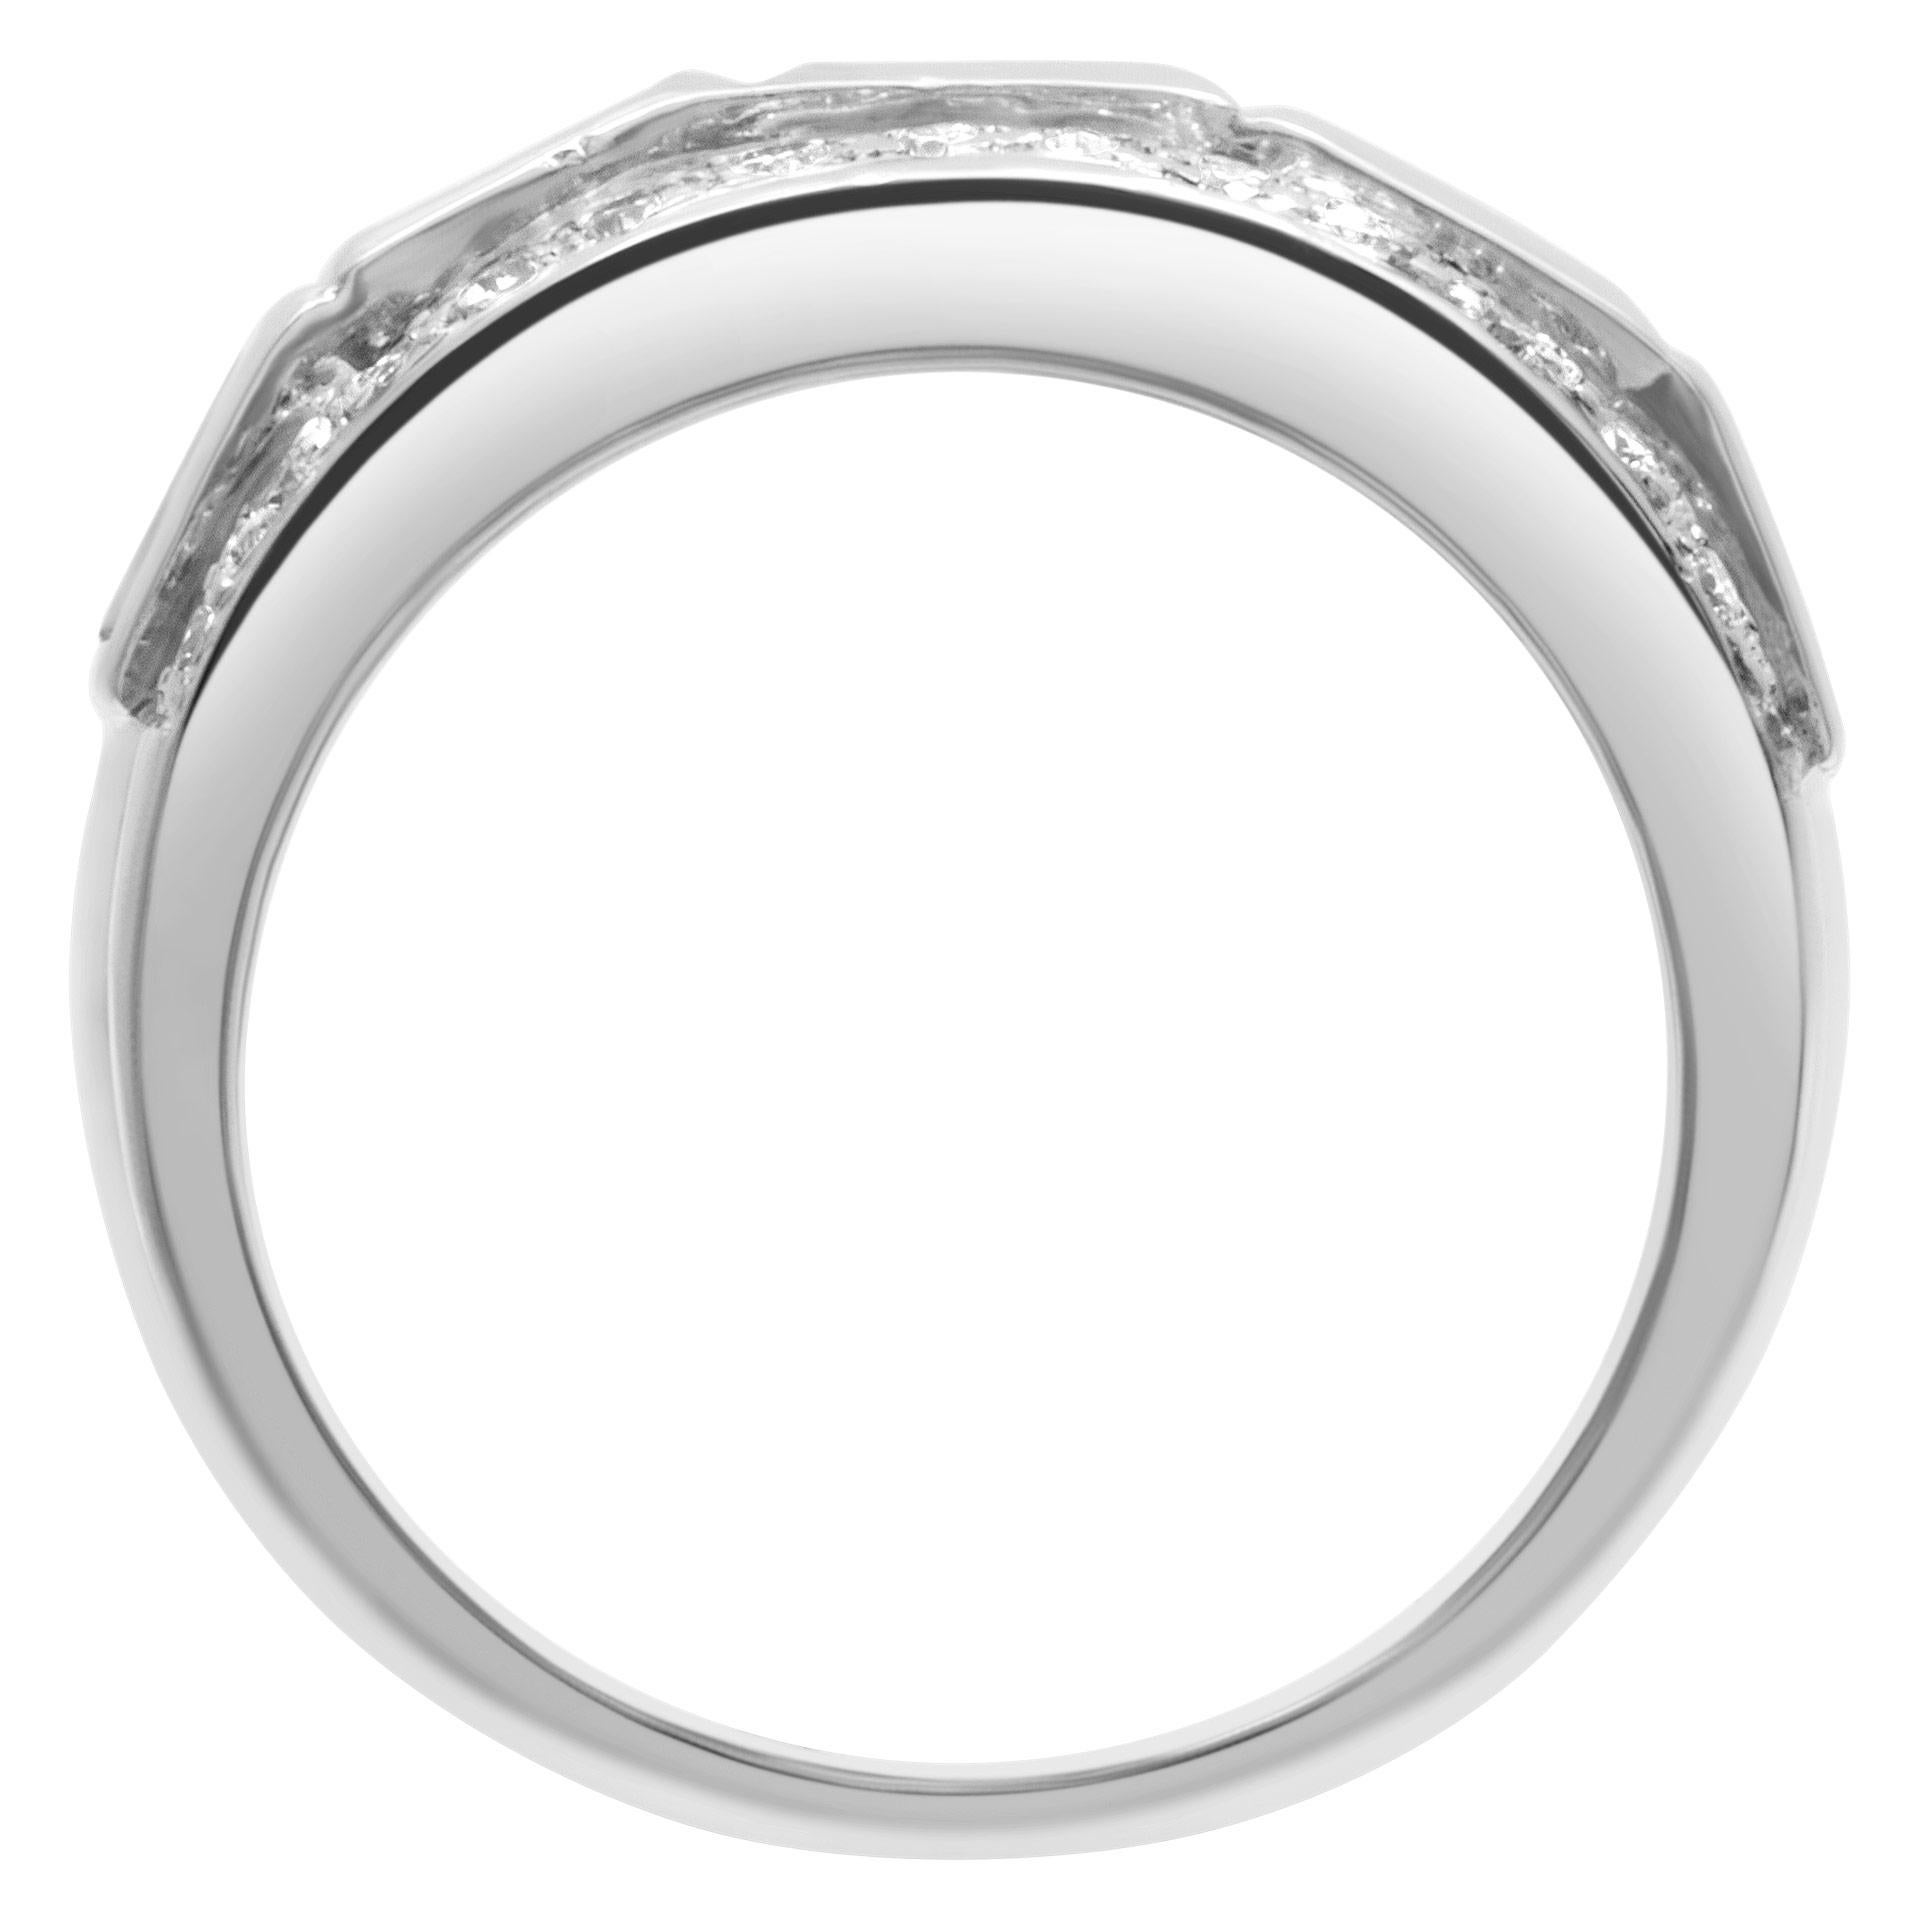 Round and Princess Cut Diamond Band in 18k White Gold In Excellent Condition For Sale In Surfside, FL